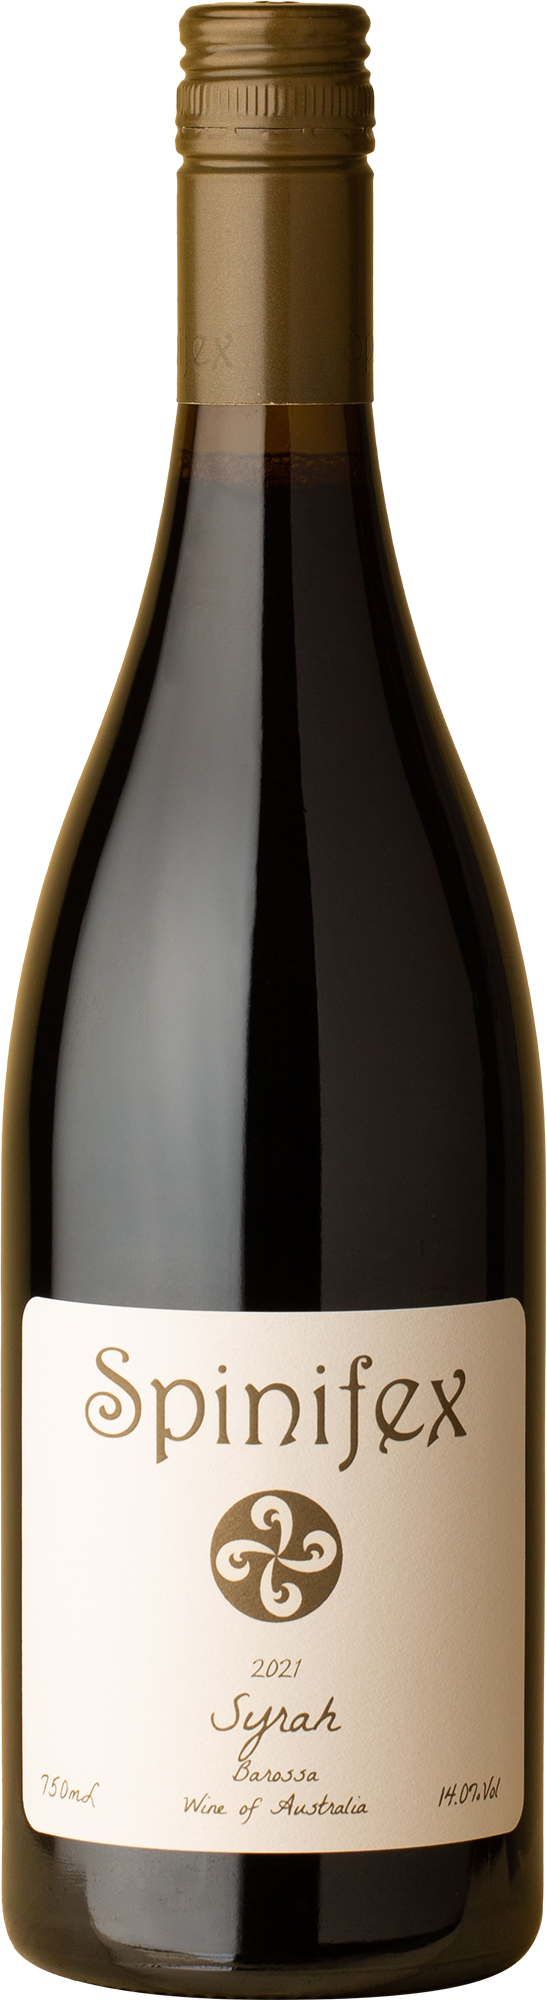 Spinifex - Syrah 2021 Red Wine